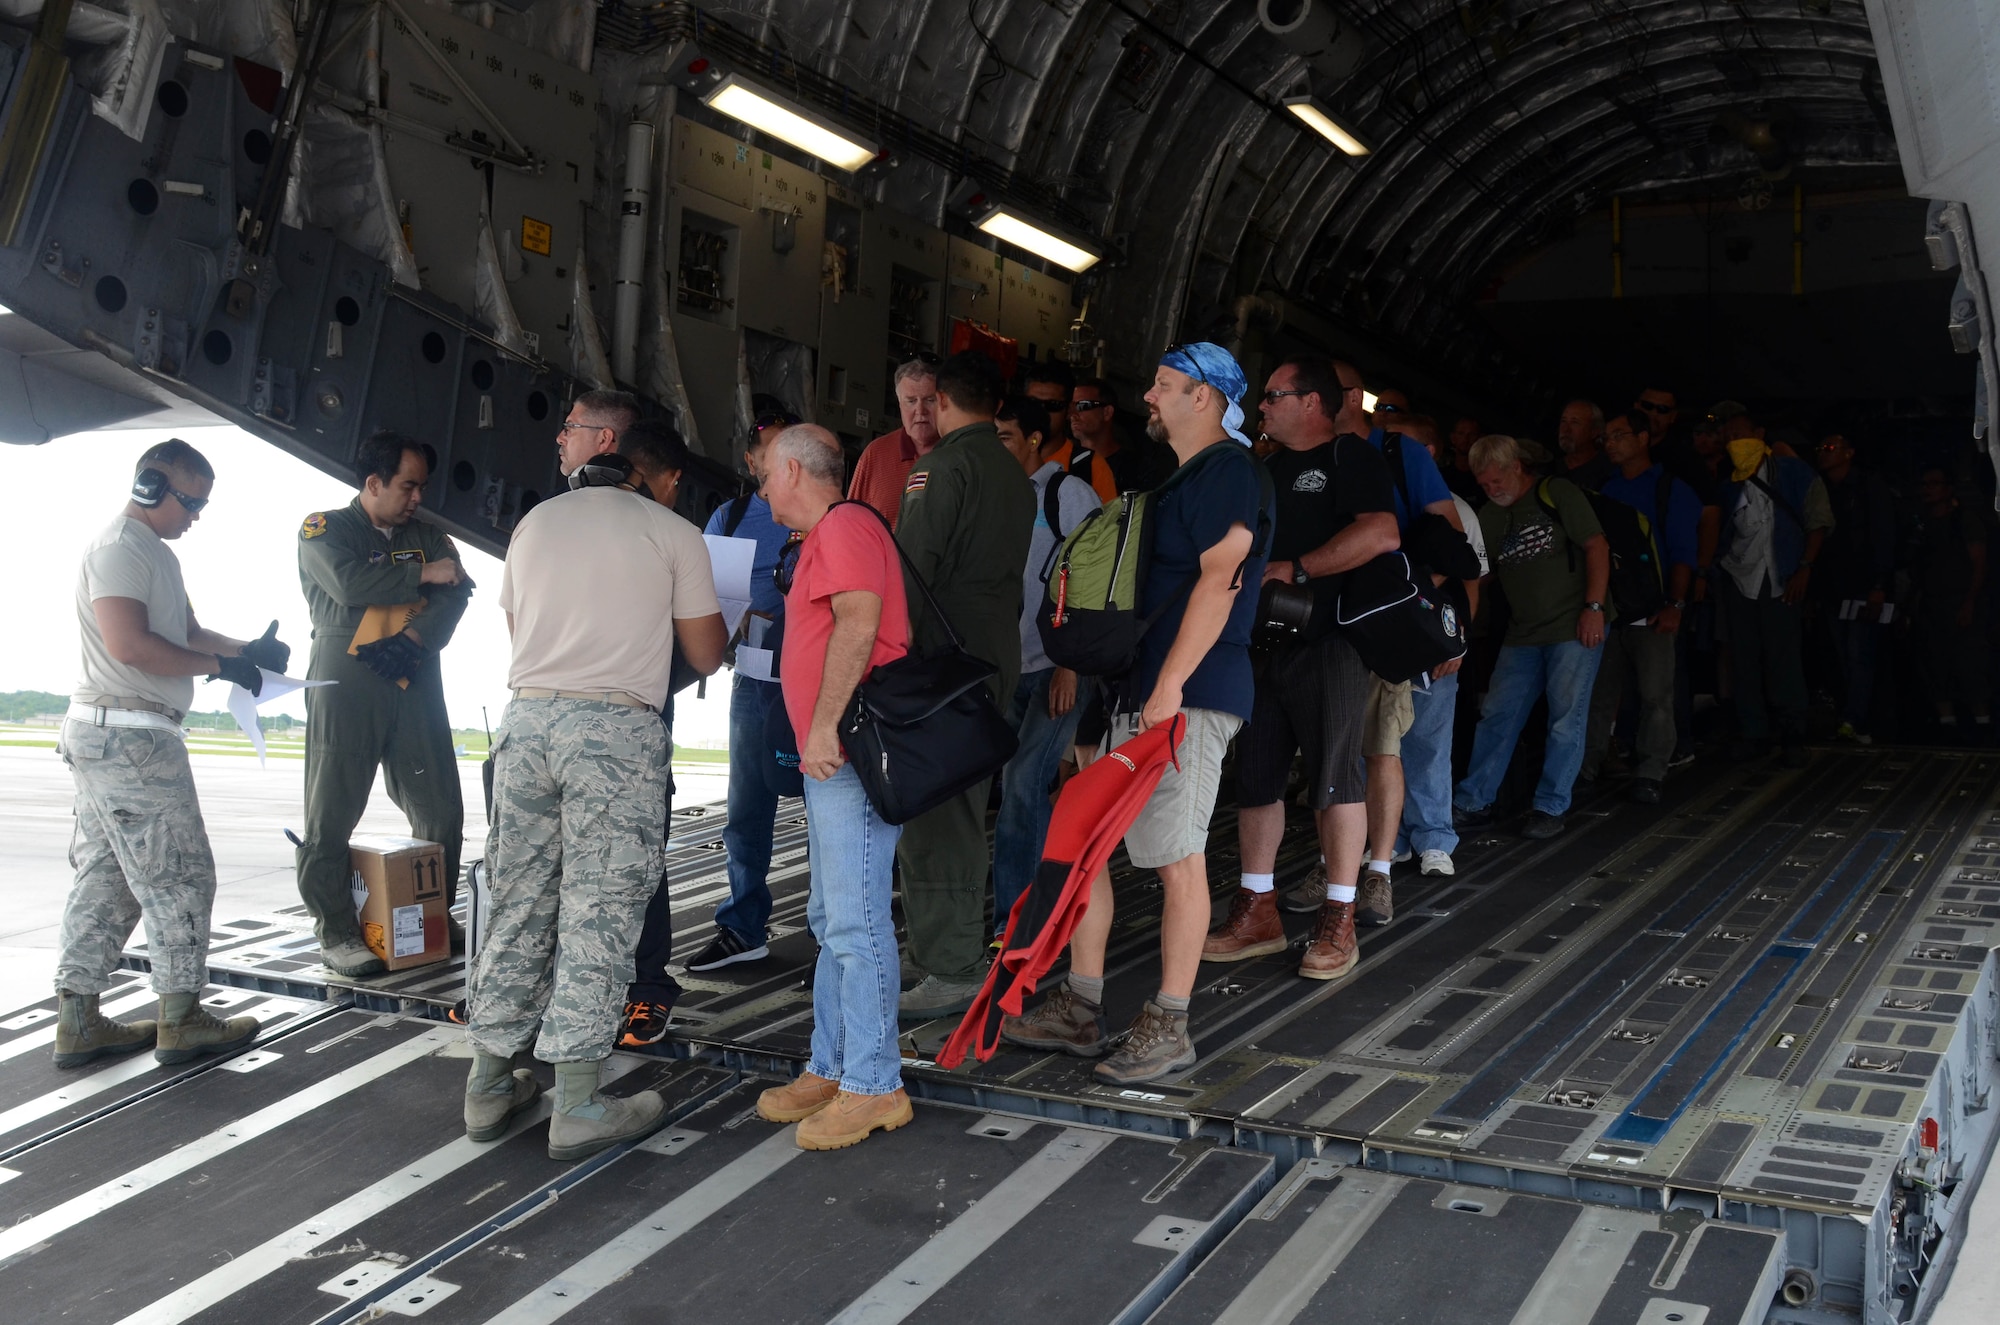 More than 125 Department of Defense members and contractors arrive at Andersen Air Force Base, Guam, July 15, 2015, after evacuation from Wake Island in preparation for potential surges caused by Typhoon Halola. An evacuation mission such as this highlights Pacific Air Force’s flexibility to generate air response quickly across the theater, which is a key component to air power. (U.S. Air Force photo by Airman 1st Class Alexa A. Henderson/Released)